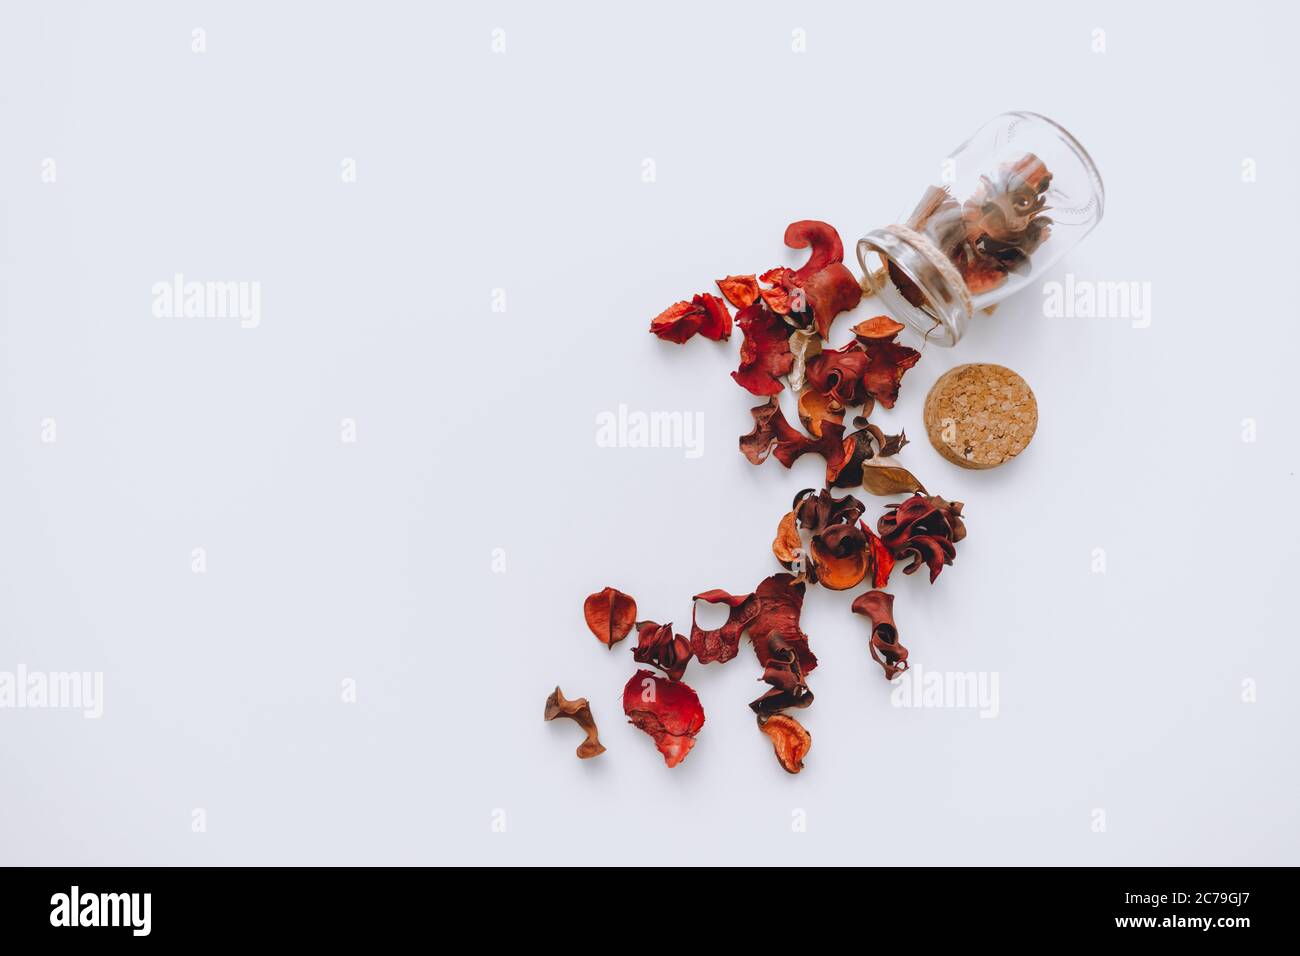 Glass jar with red scattered dried petals isolated on a white background Stock Photo